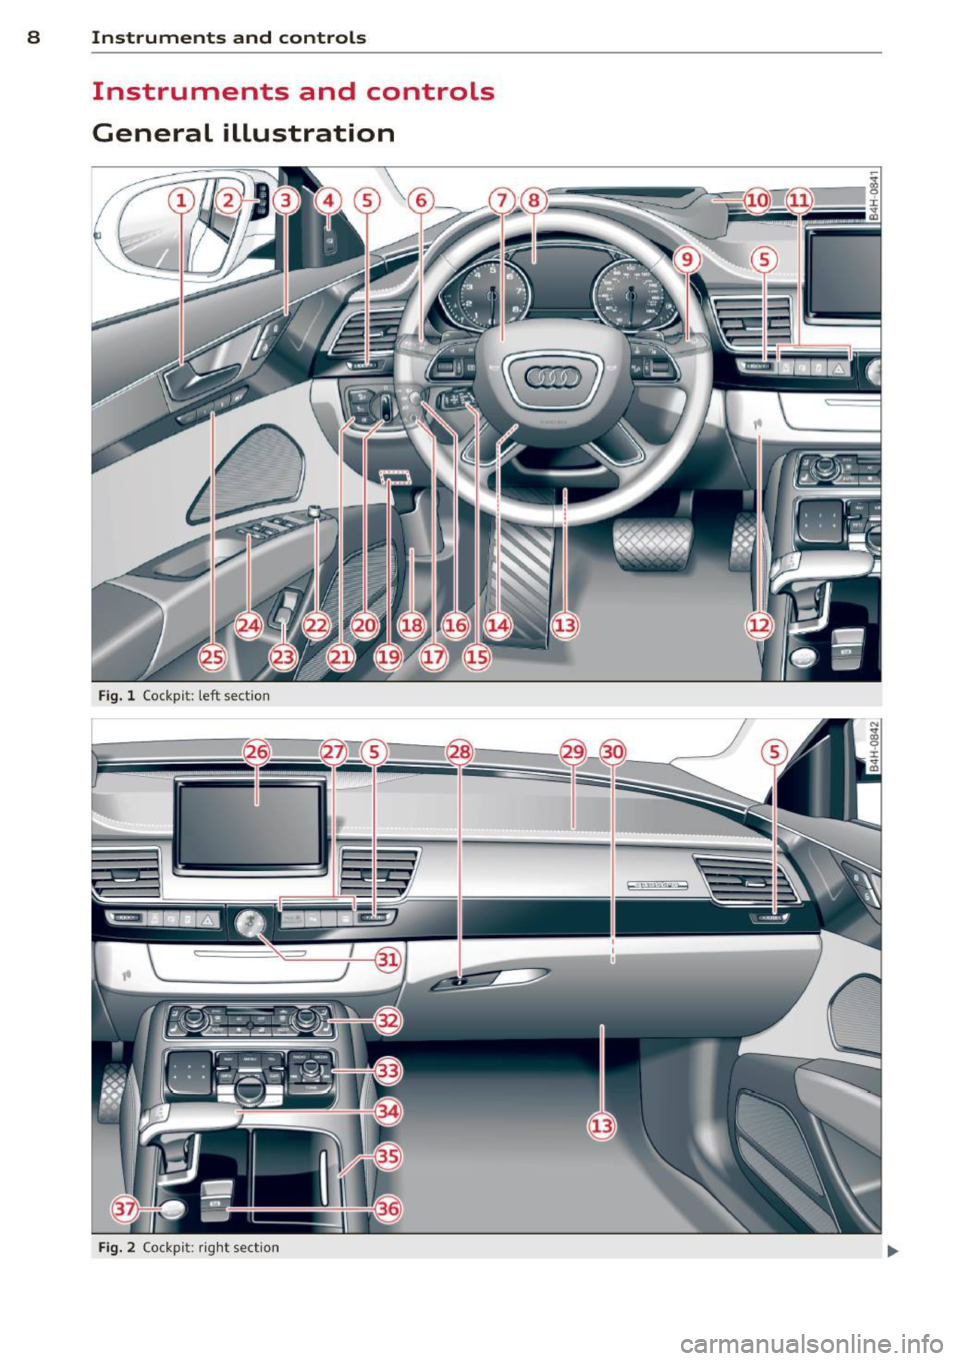 AUDI A8 2015  Owners Manual 8  Instruments and controls 
Instruments  and  controls 
General  illustration 
Fig. l Cockp it:  left  sect io n 
Fig. 2 Co ck pi t: ri ght  sect io n  